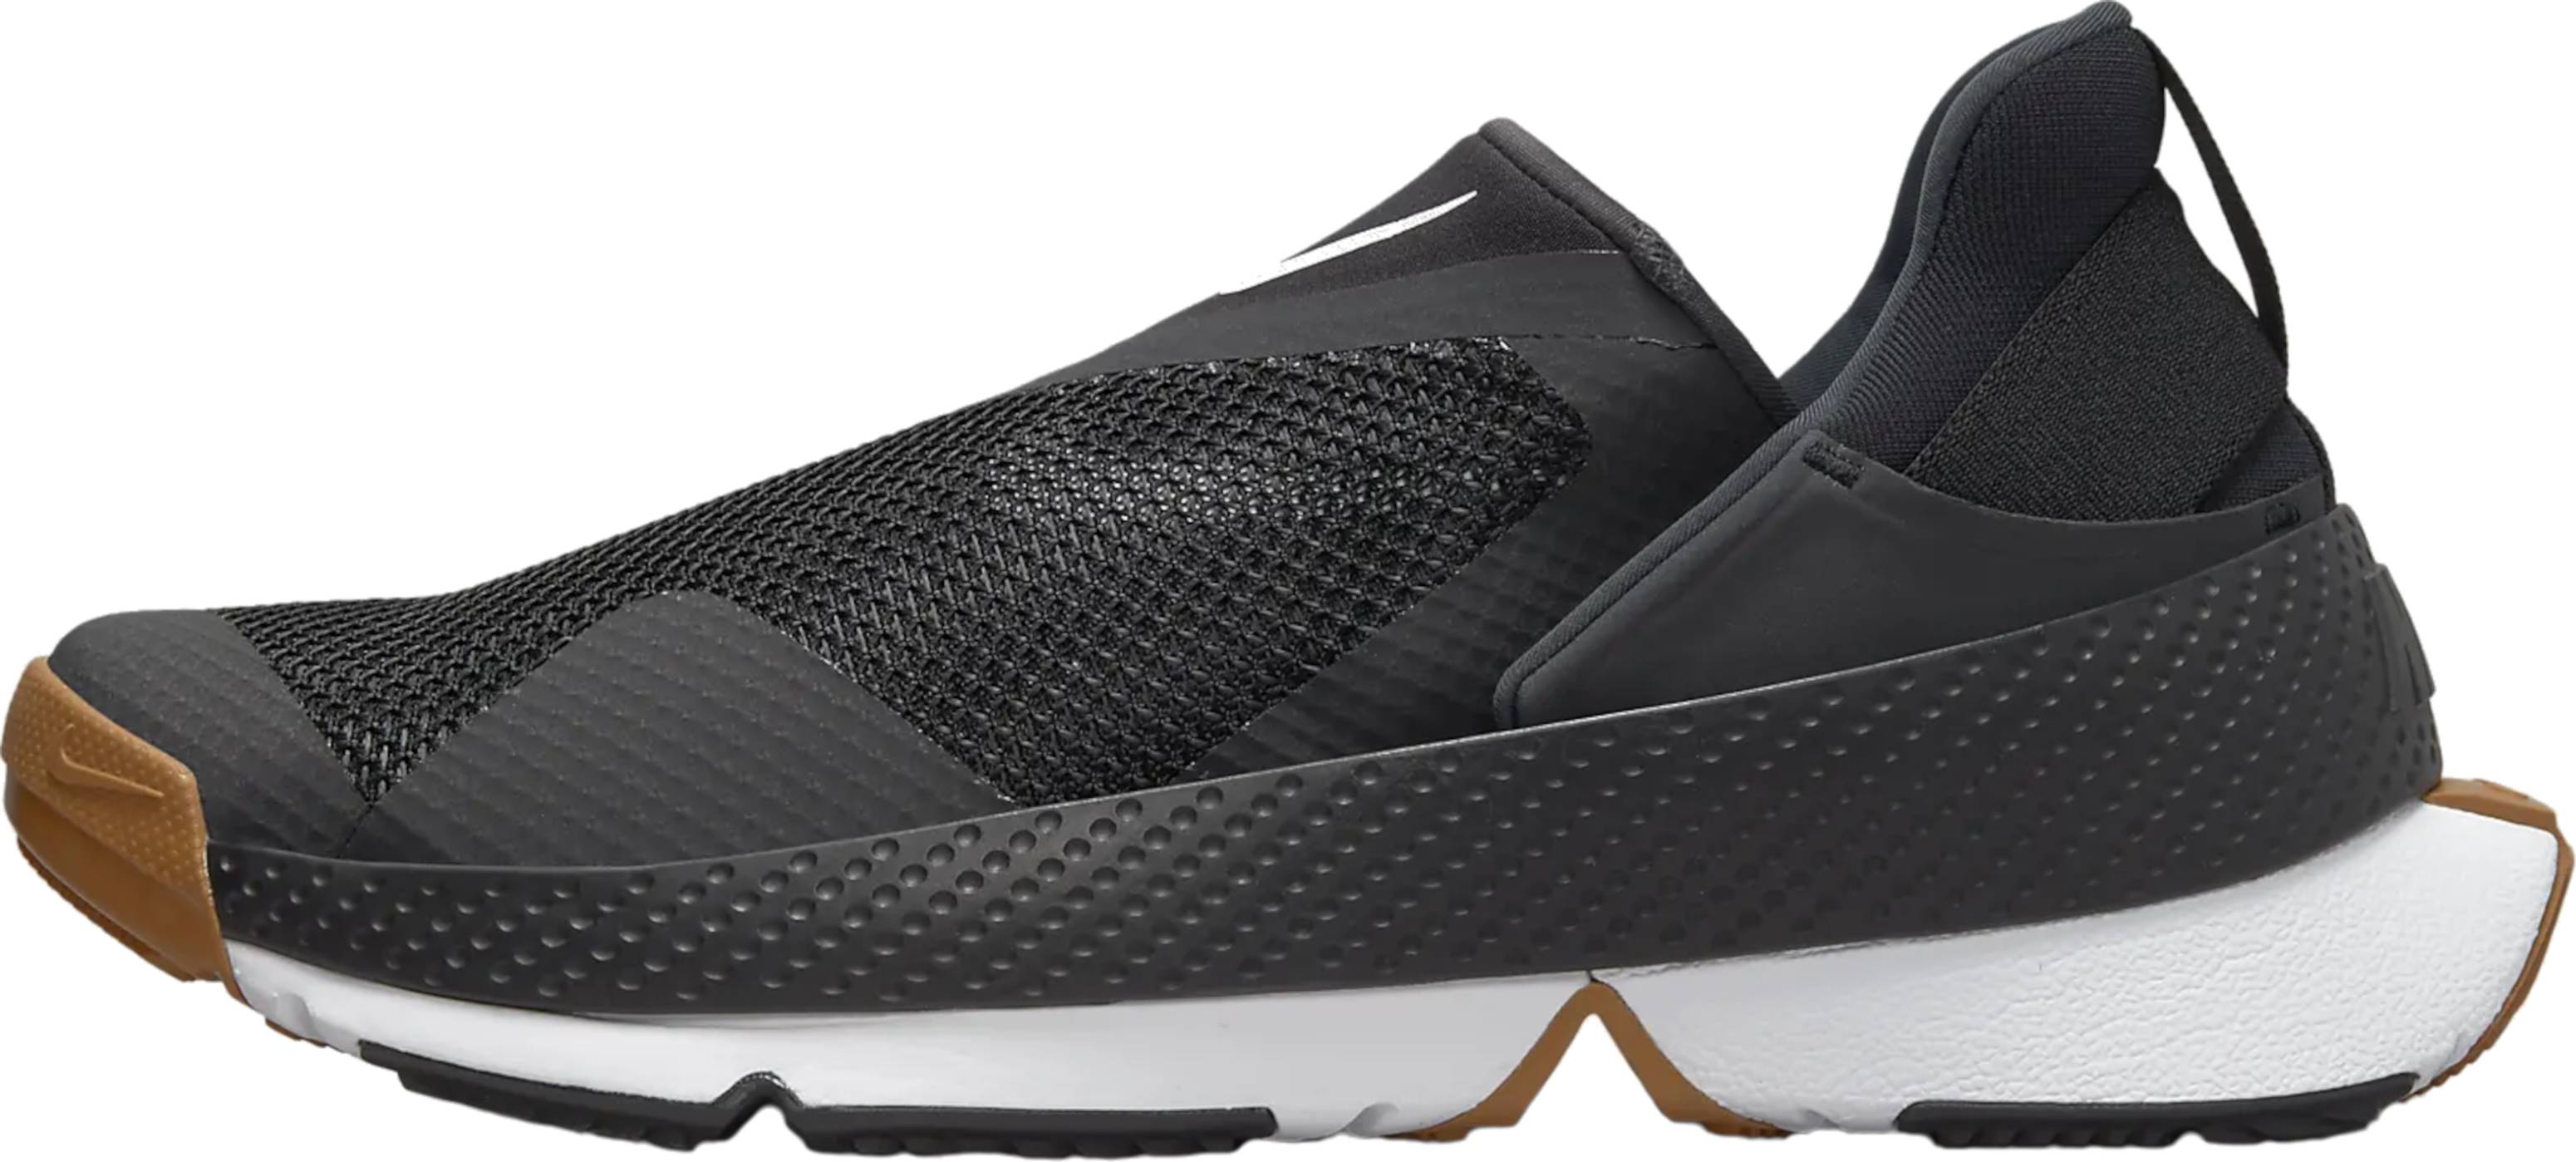 Nike Go FlyEase sneakers in 10+ colors (only $93) | RunRepeat